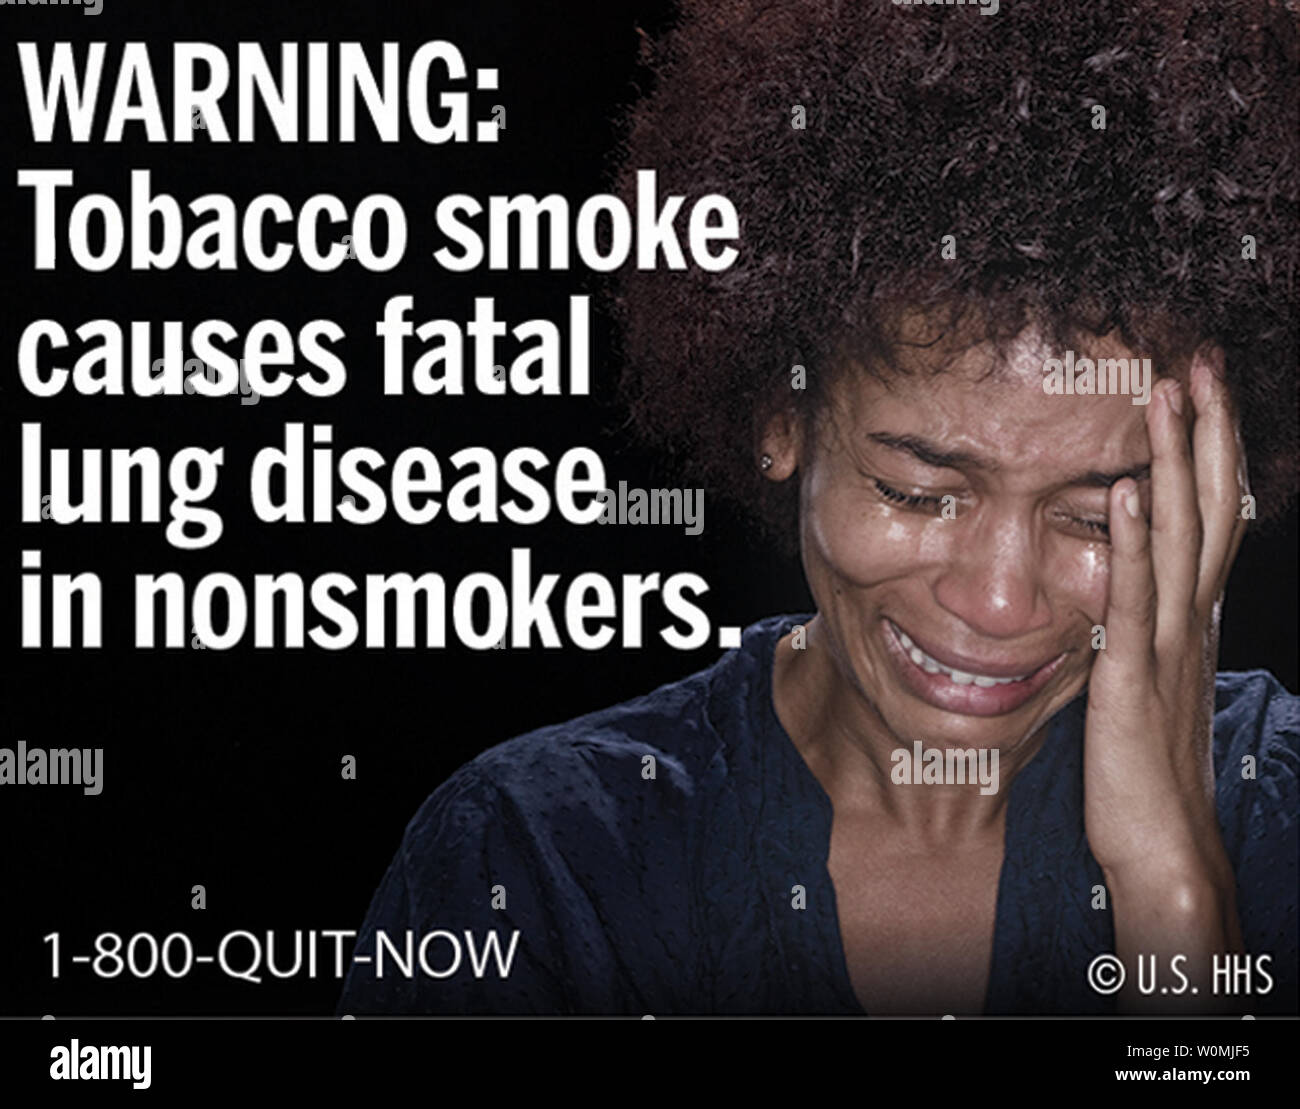 This FDA image released on June 21, 2011 shows one of the new proposed cigarette warning labels. Beginning September 2012, FDA will require larger, more prominent cigarette health warnings on all cigarette packaging and advertisements in the United States.  These warnings mark the first change in cigarette warnings in more than 25 years and are a significant advancement in communicating the dangers of smoking.  UPI/FDA Stock Photo